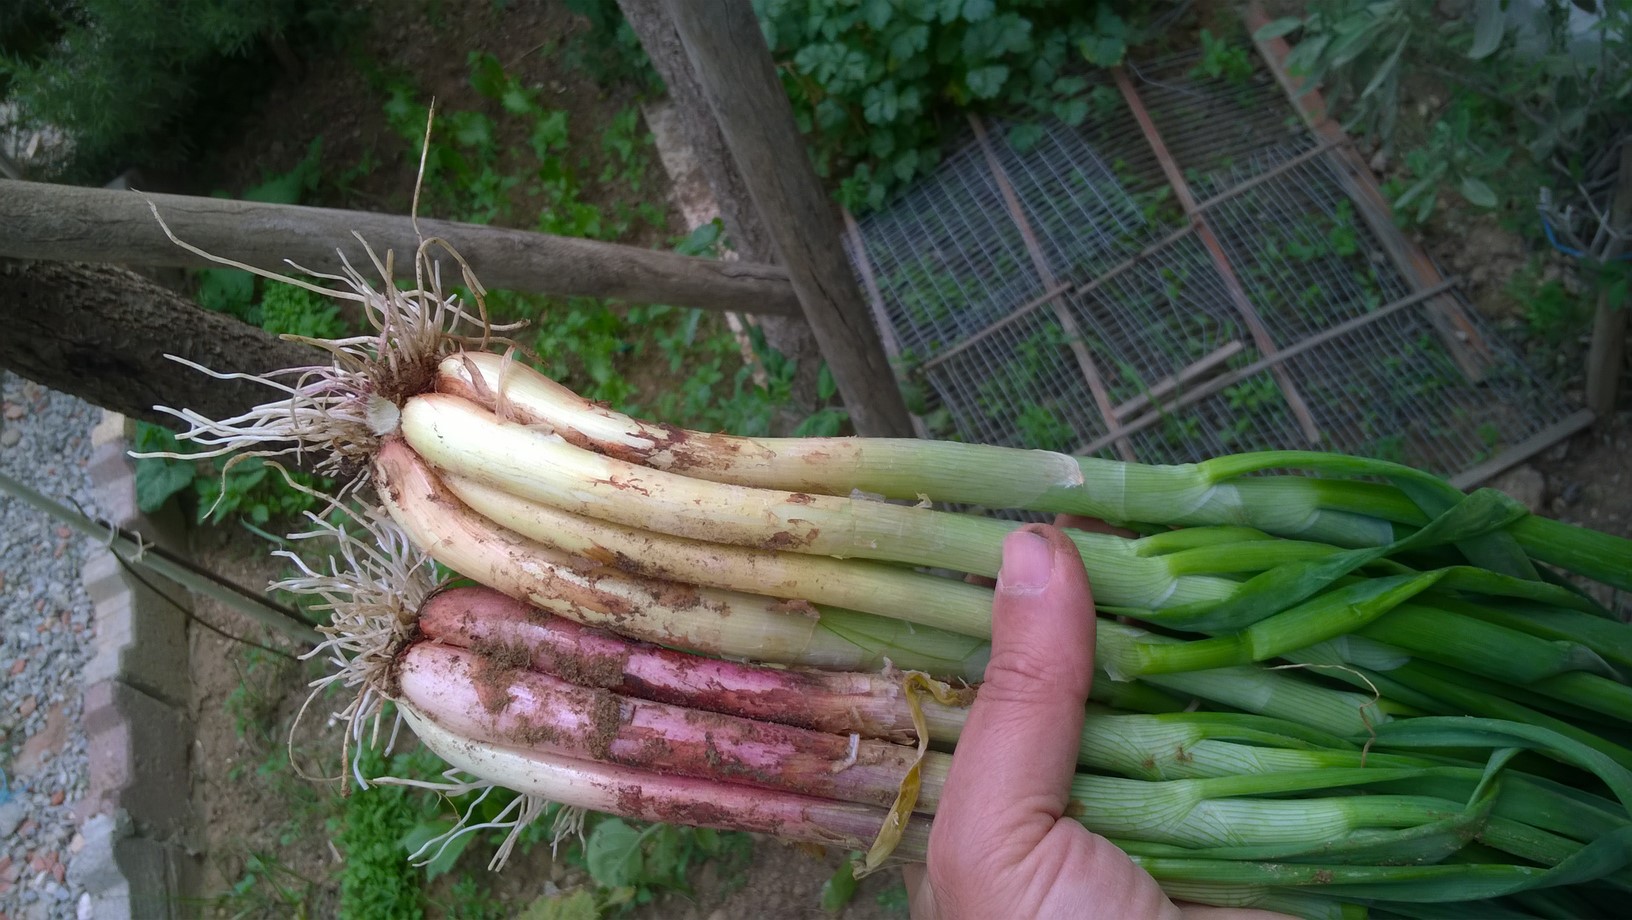 Carefully pull or dig all the onions up from the ground with the tops intact.